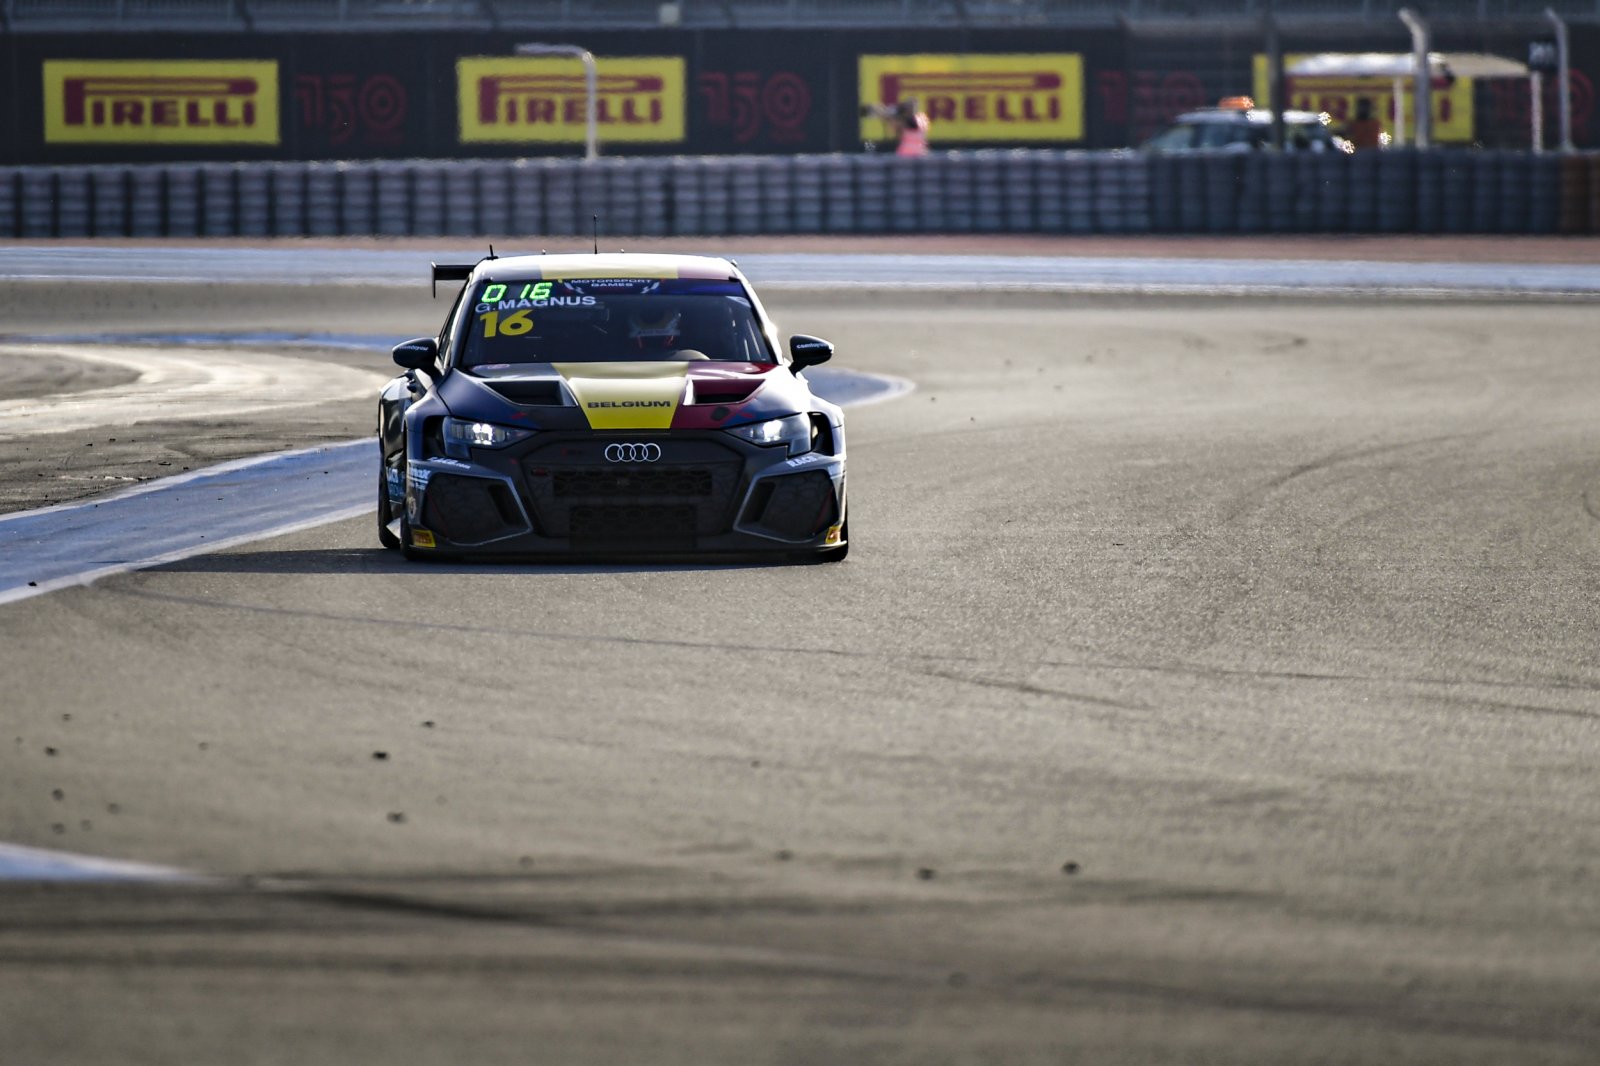 Touring Cars - Belgium lay down first marker in Free Practice